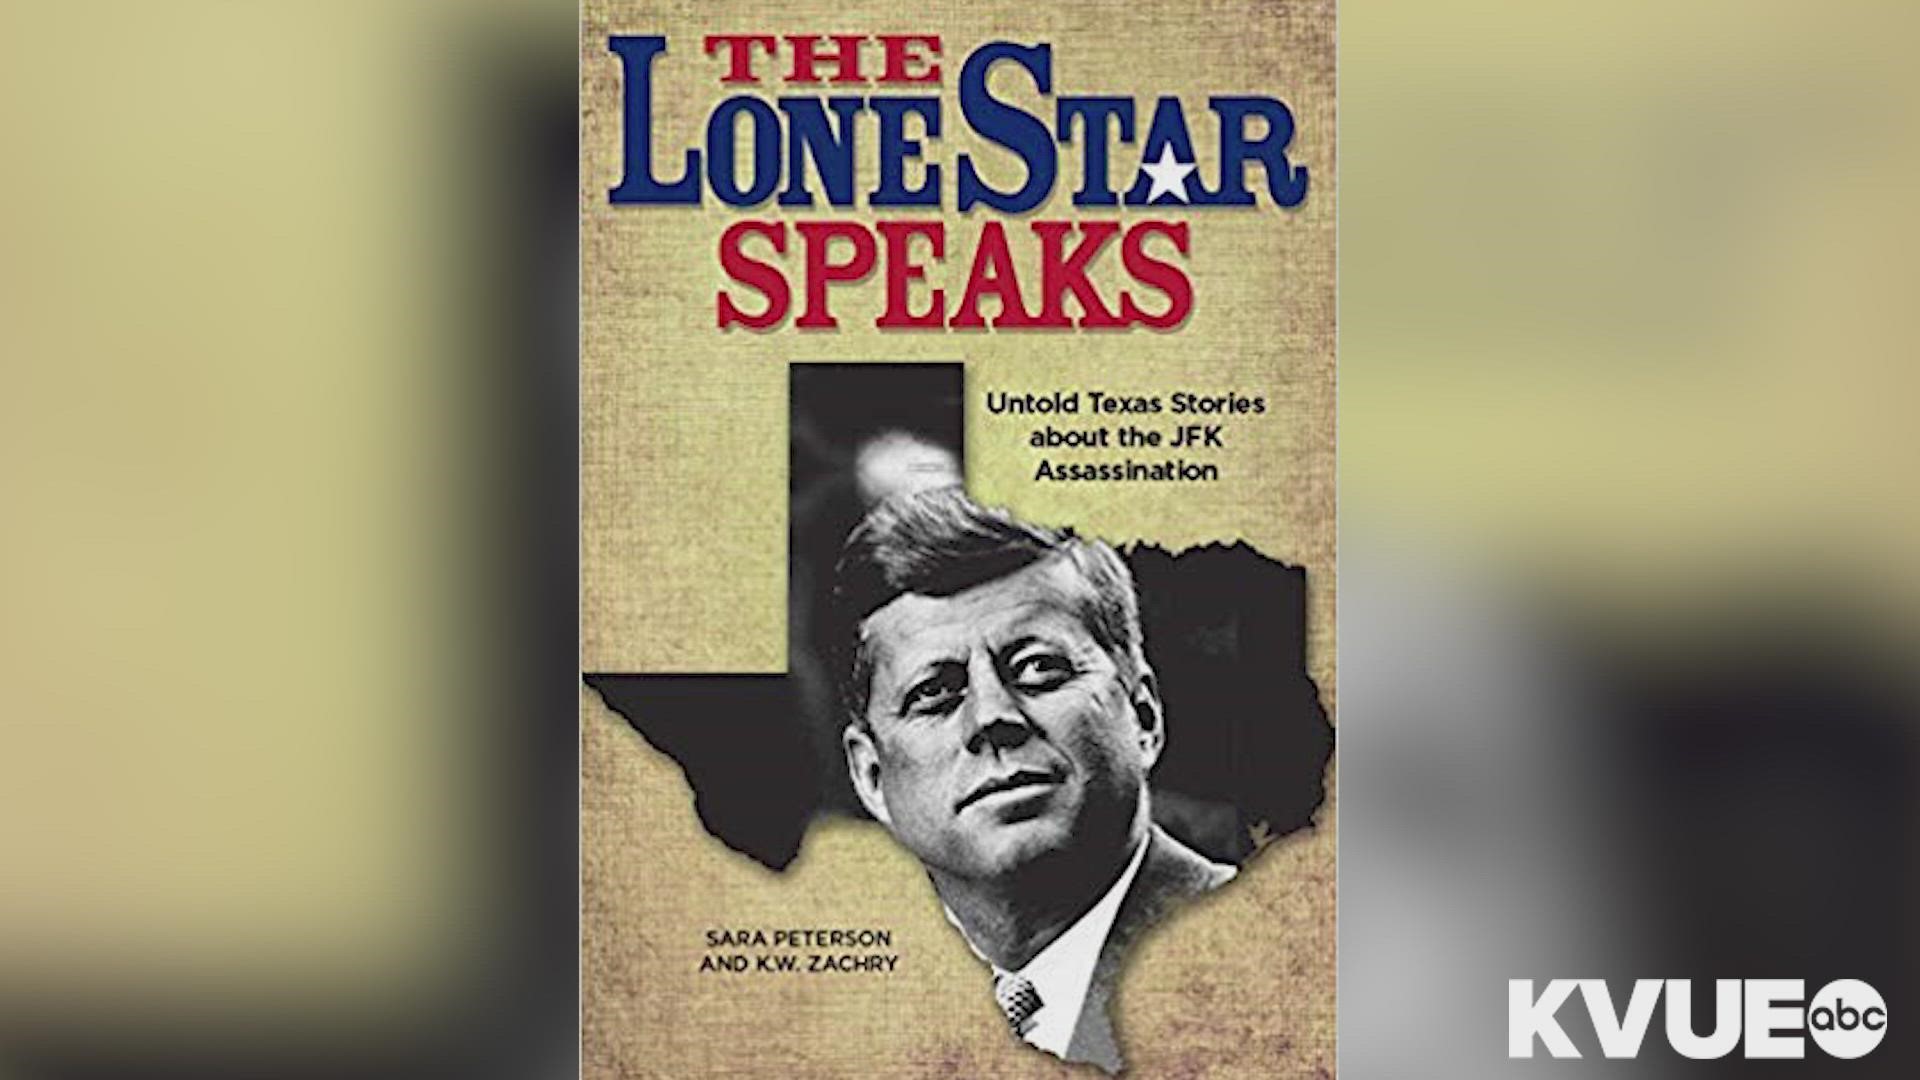 KVUE Special Projects Producer Bob Buckalew interviews authors Sara Peterson and Katanna Zachry about their new book on the 1963 assassination of JFK.